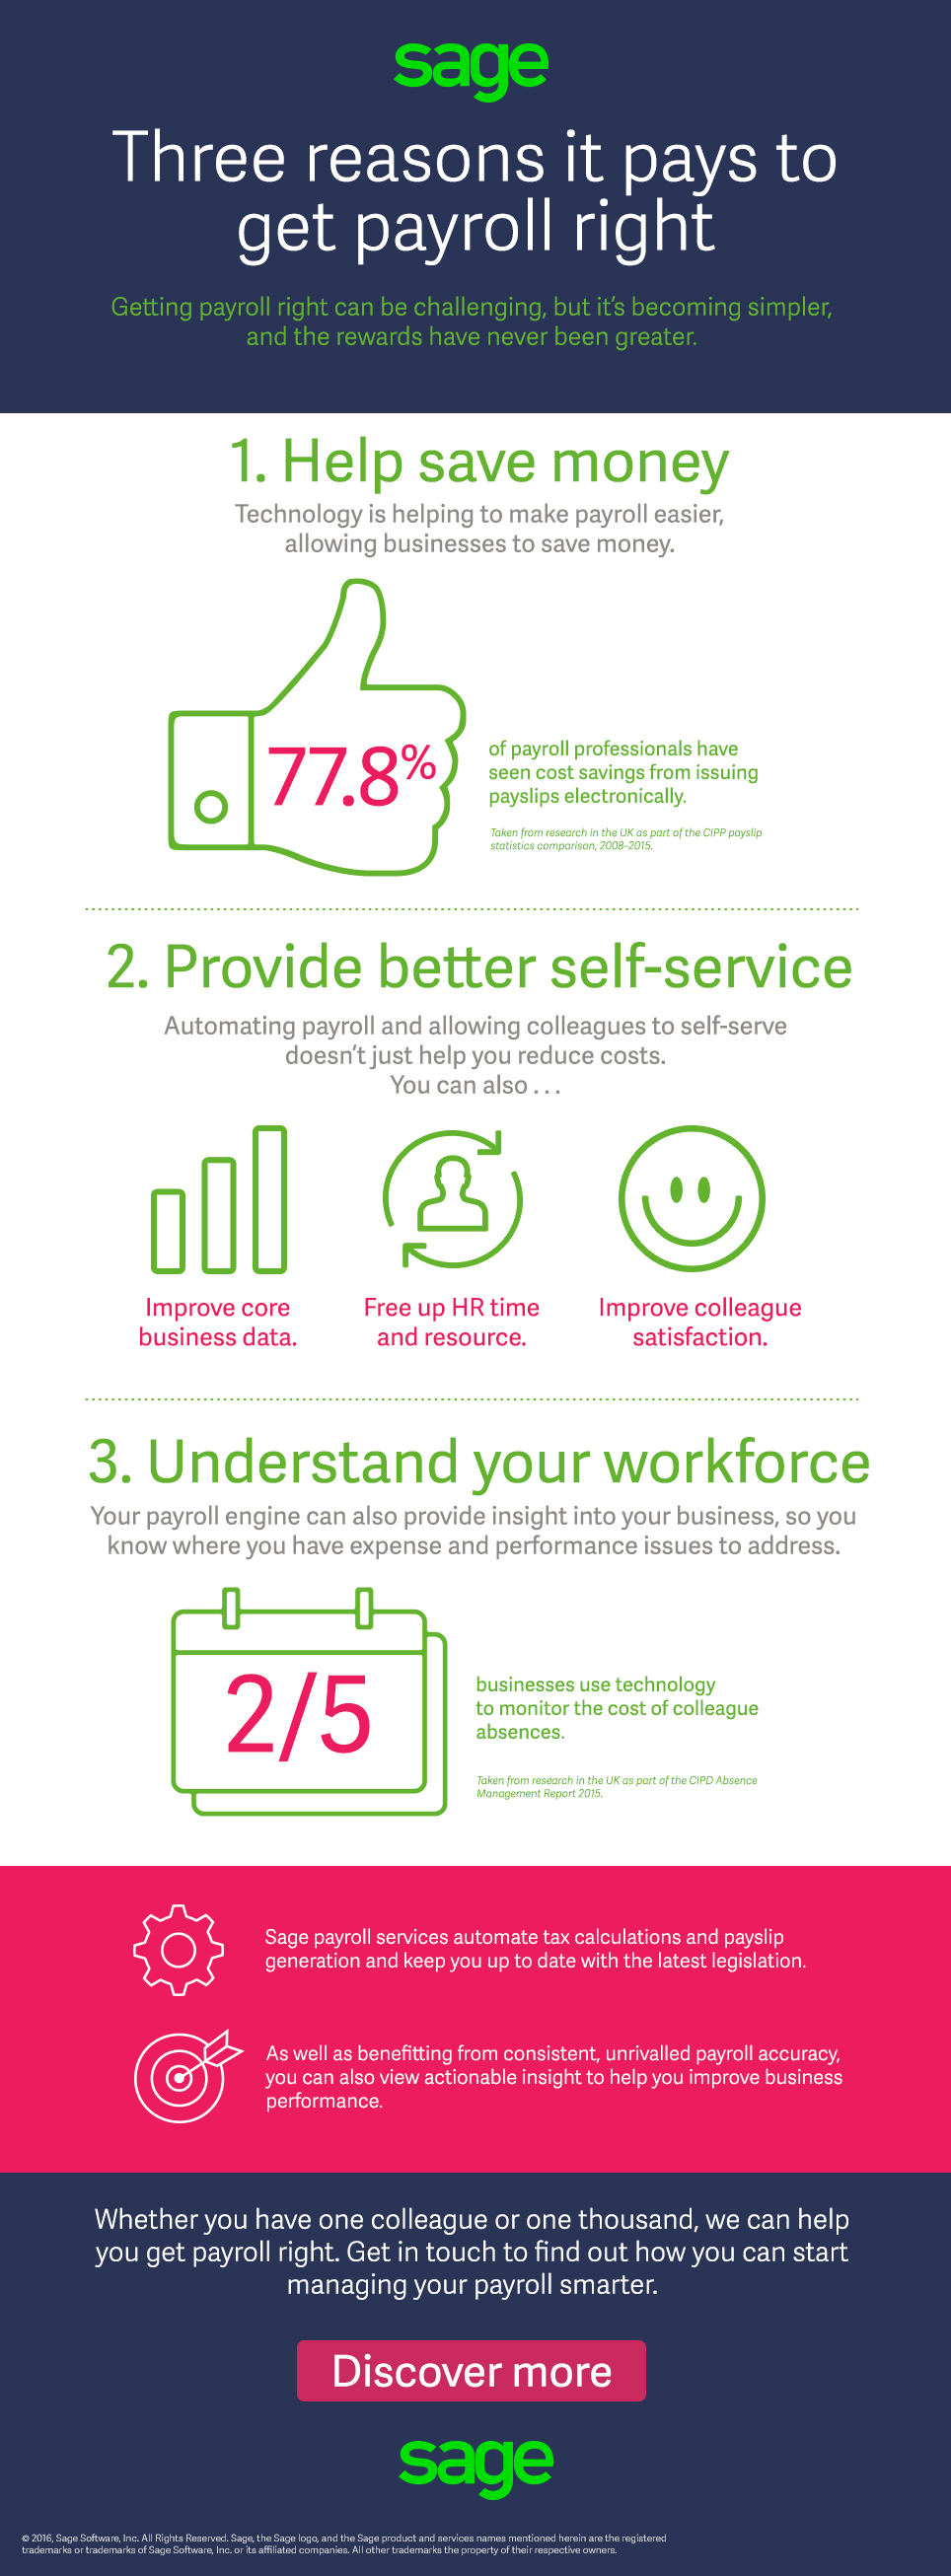 Infographic: 3 reasons why it pays to get payroll right